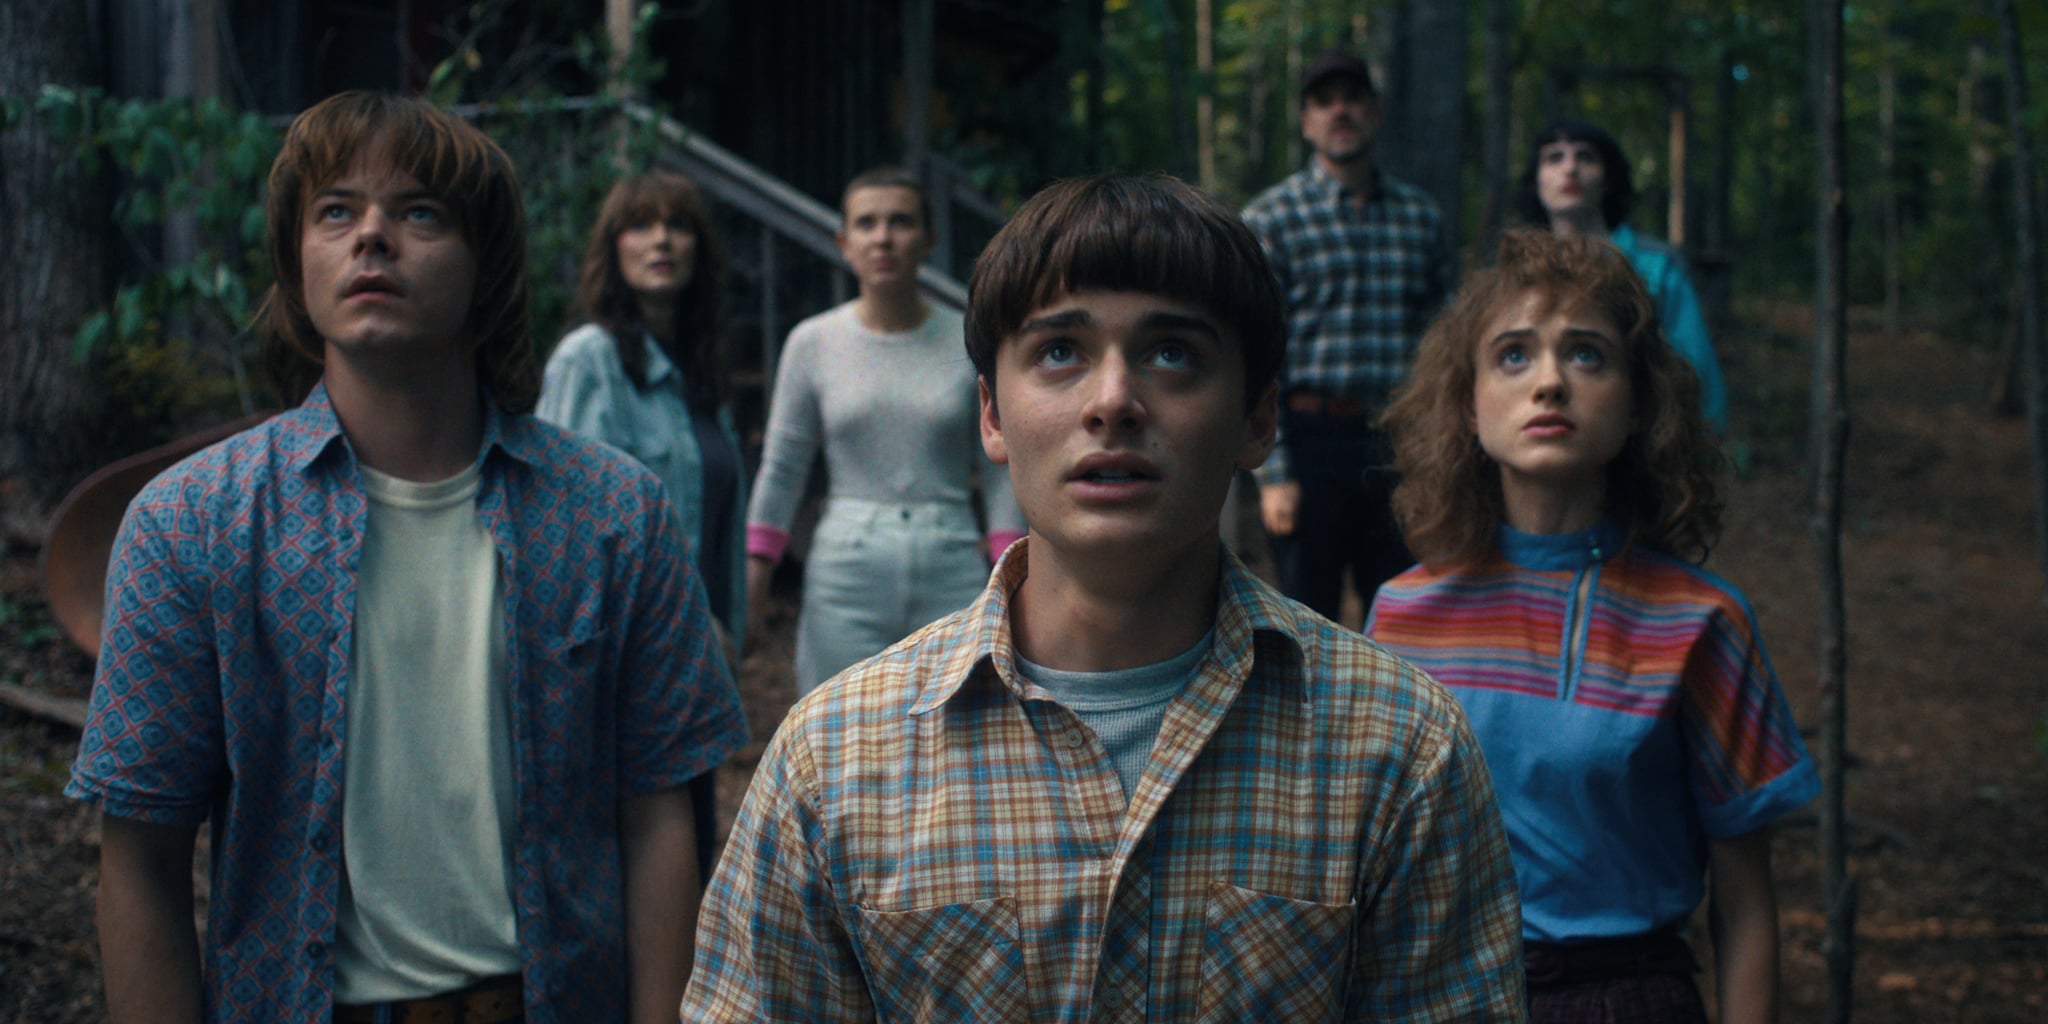 Stranger Thing fans convinced 'The American' is Hawkins test subject like  Eleven – and Hopper is dead after all